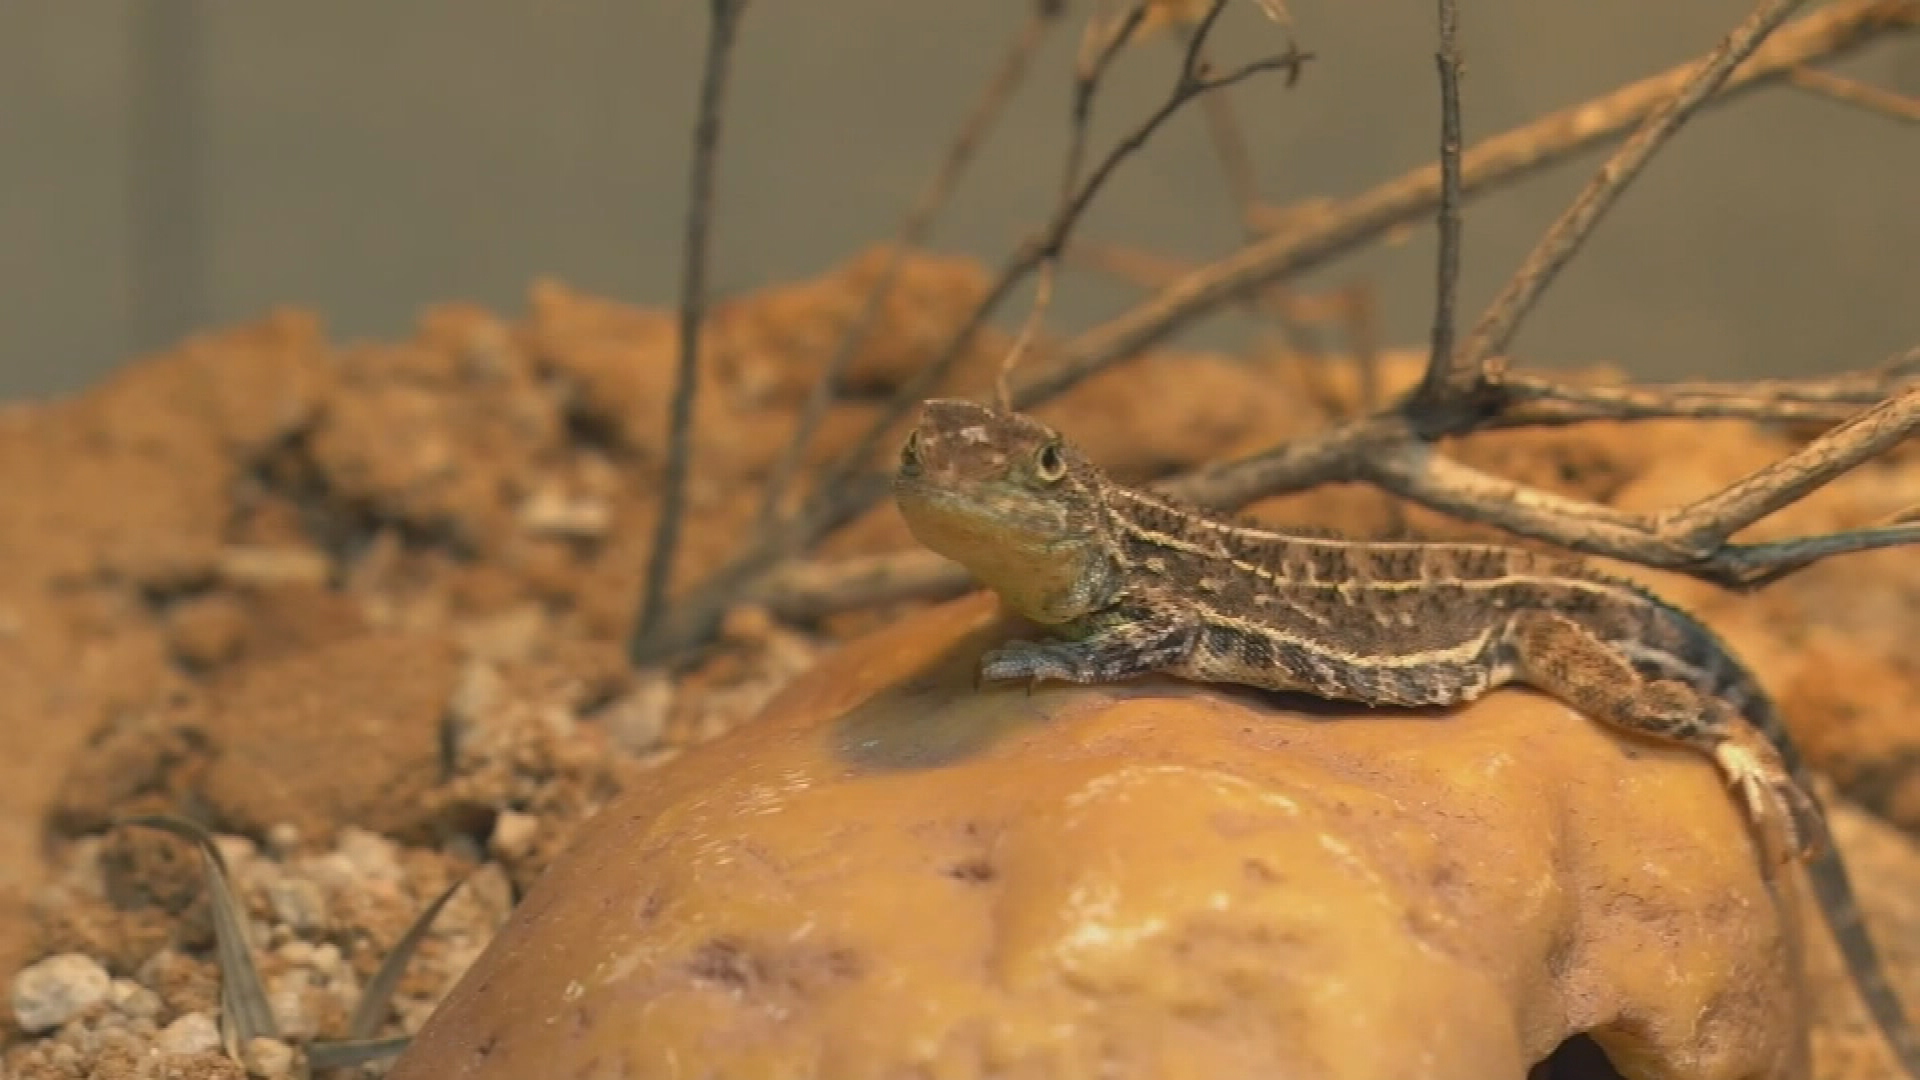 Tiny reptile thought to be extinct holding up housing developments